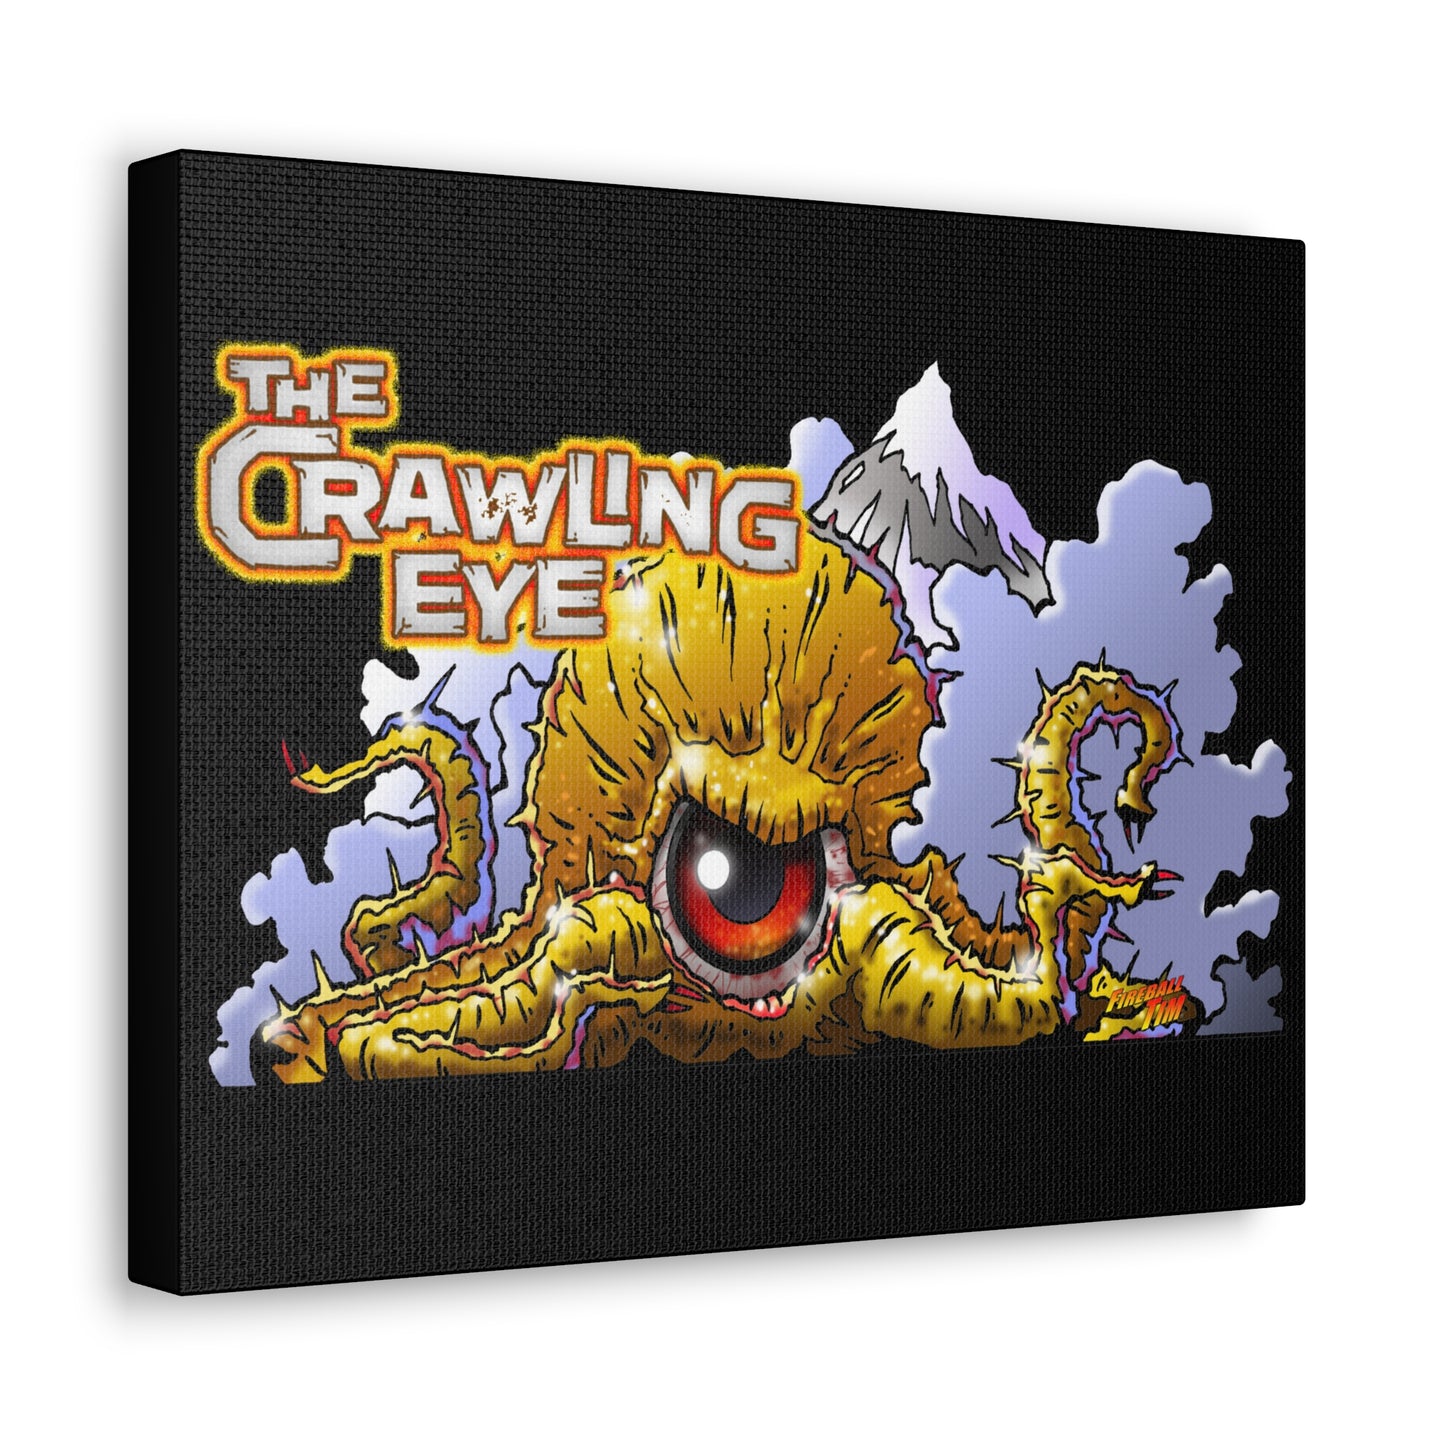 THE CRAWLING EYE Classic Monster Horror Movie Canvas Gallery Art Print 11x14